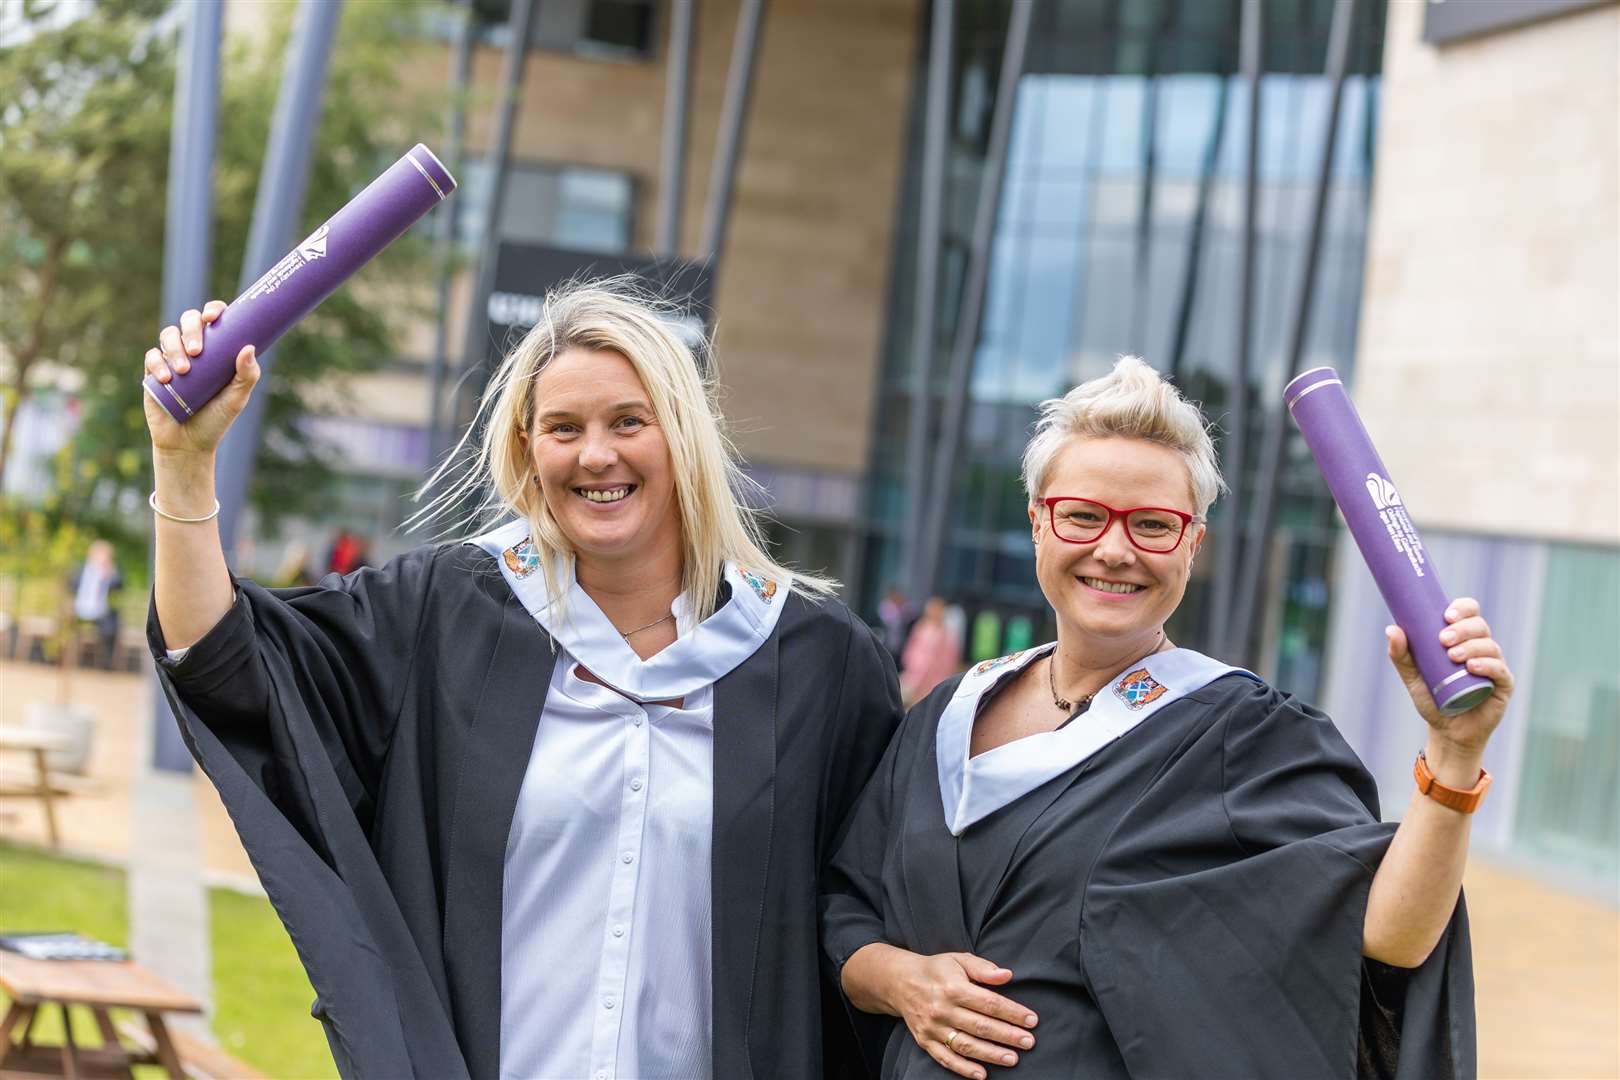 HND Sports Therapy graduates Jo Abernethy and Lidia Kuzma from Inverness celebrate together.